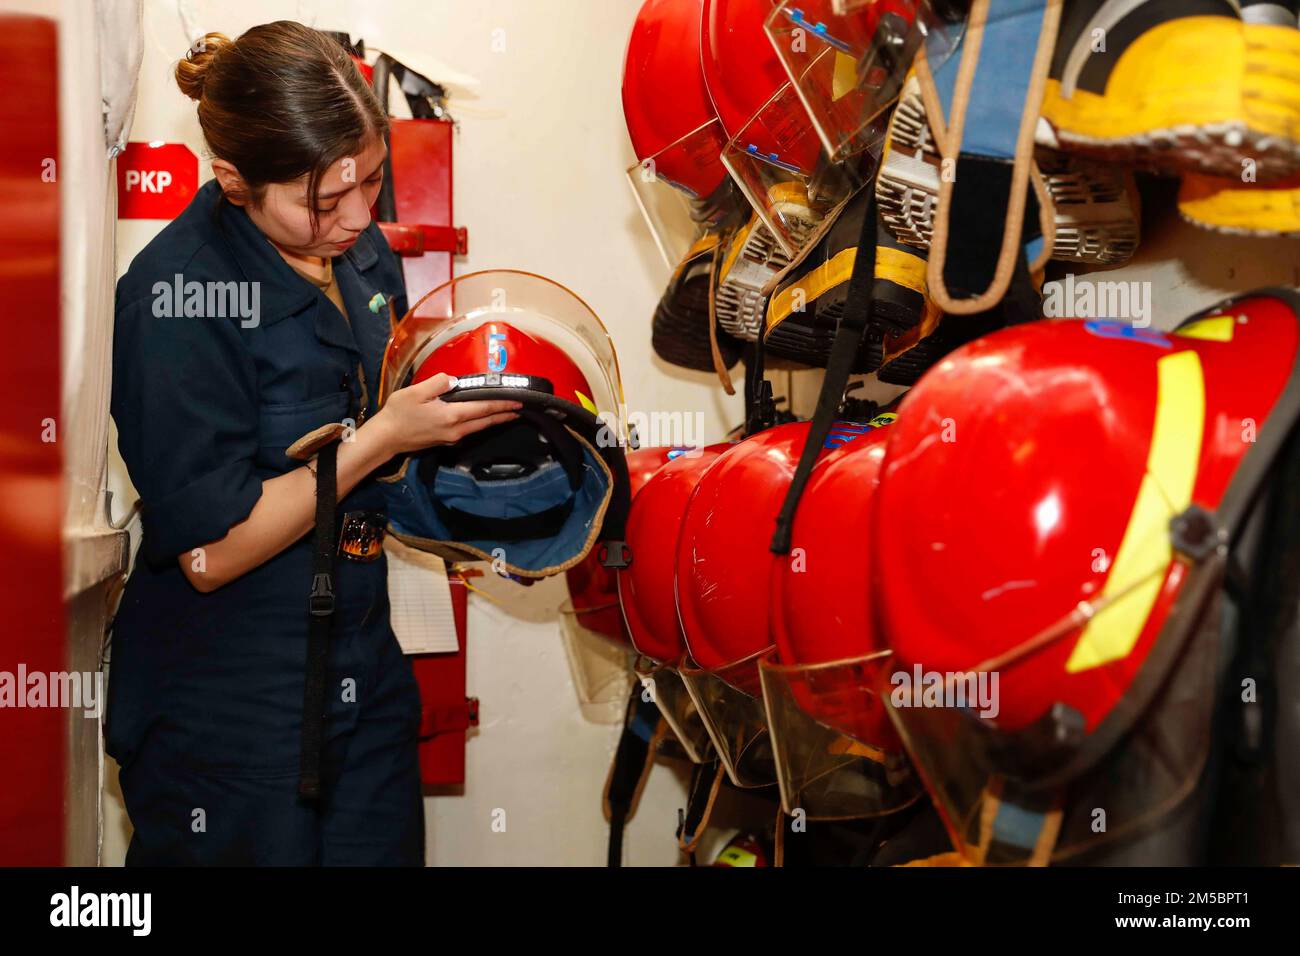 PHILIPPINE SEA (Feb. 24, 2022) Damage Controlman Fireman Michelle Romo, from Rancho Cucamonga, Calif., inspects firefighting equipment in a repair locker aboard the Nimitz-class aircraft carrier USS Abraham Lincoln (CVN 72). Abraham Lincoln Strike Group is on a scheduled deployment in the U.S. 7th Fleet area of operations to enhance interoperability through alliances and partnerships while serving as a ready-response force in support of a free and open Indo-Pacific region. Stock Photo